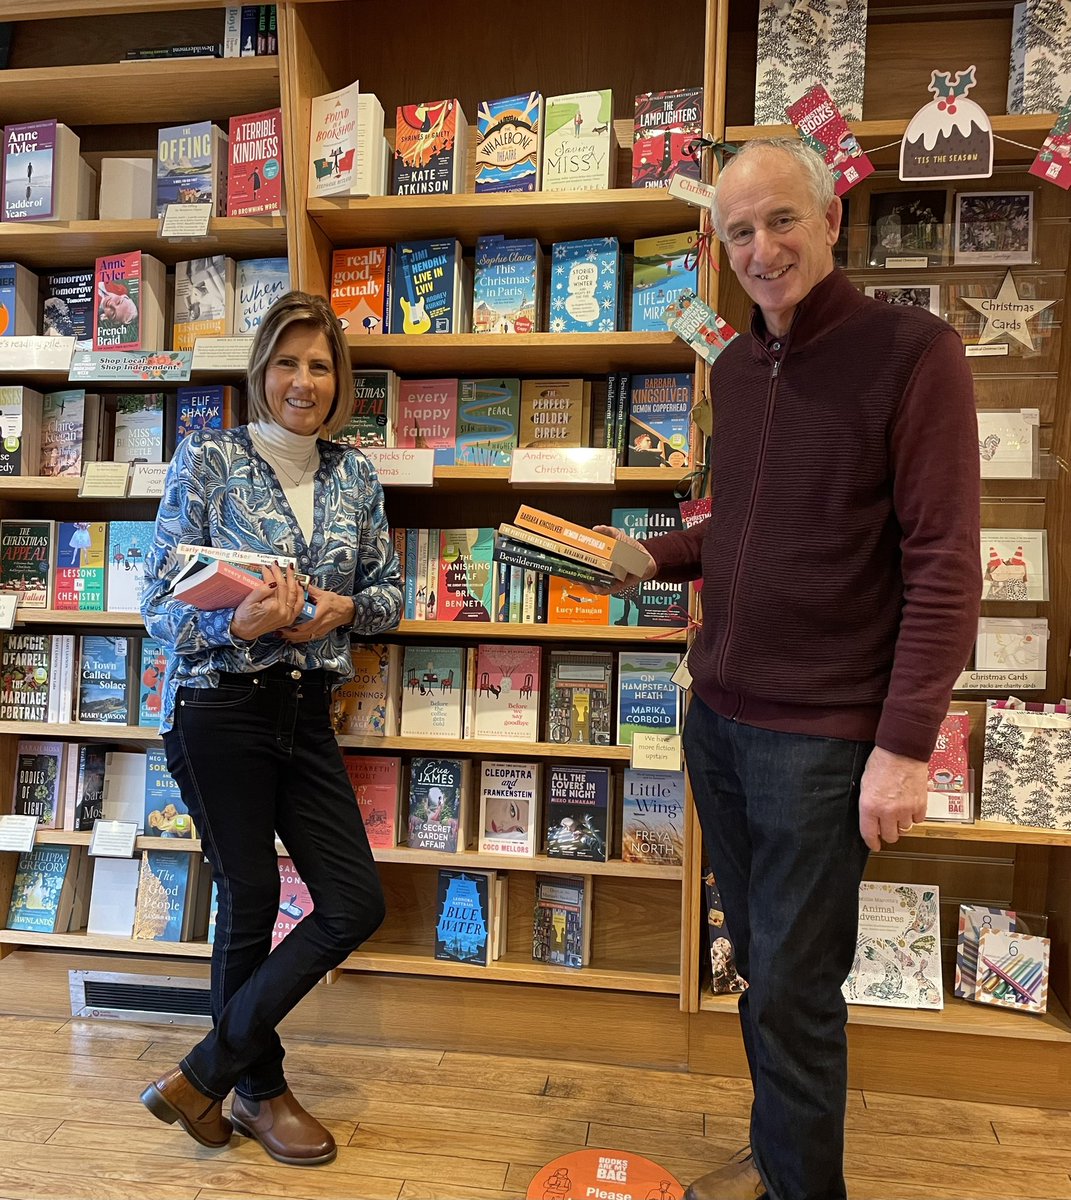 We’ve made a huge decision & put our bookshop up for sale! It’s thriving & after 21yrs the time feels right to pass the baton on. Interested? Want to know more? Do get in touch & please lovely people spread the word.